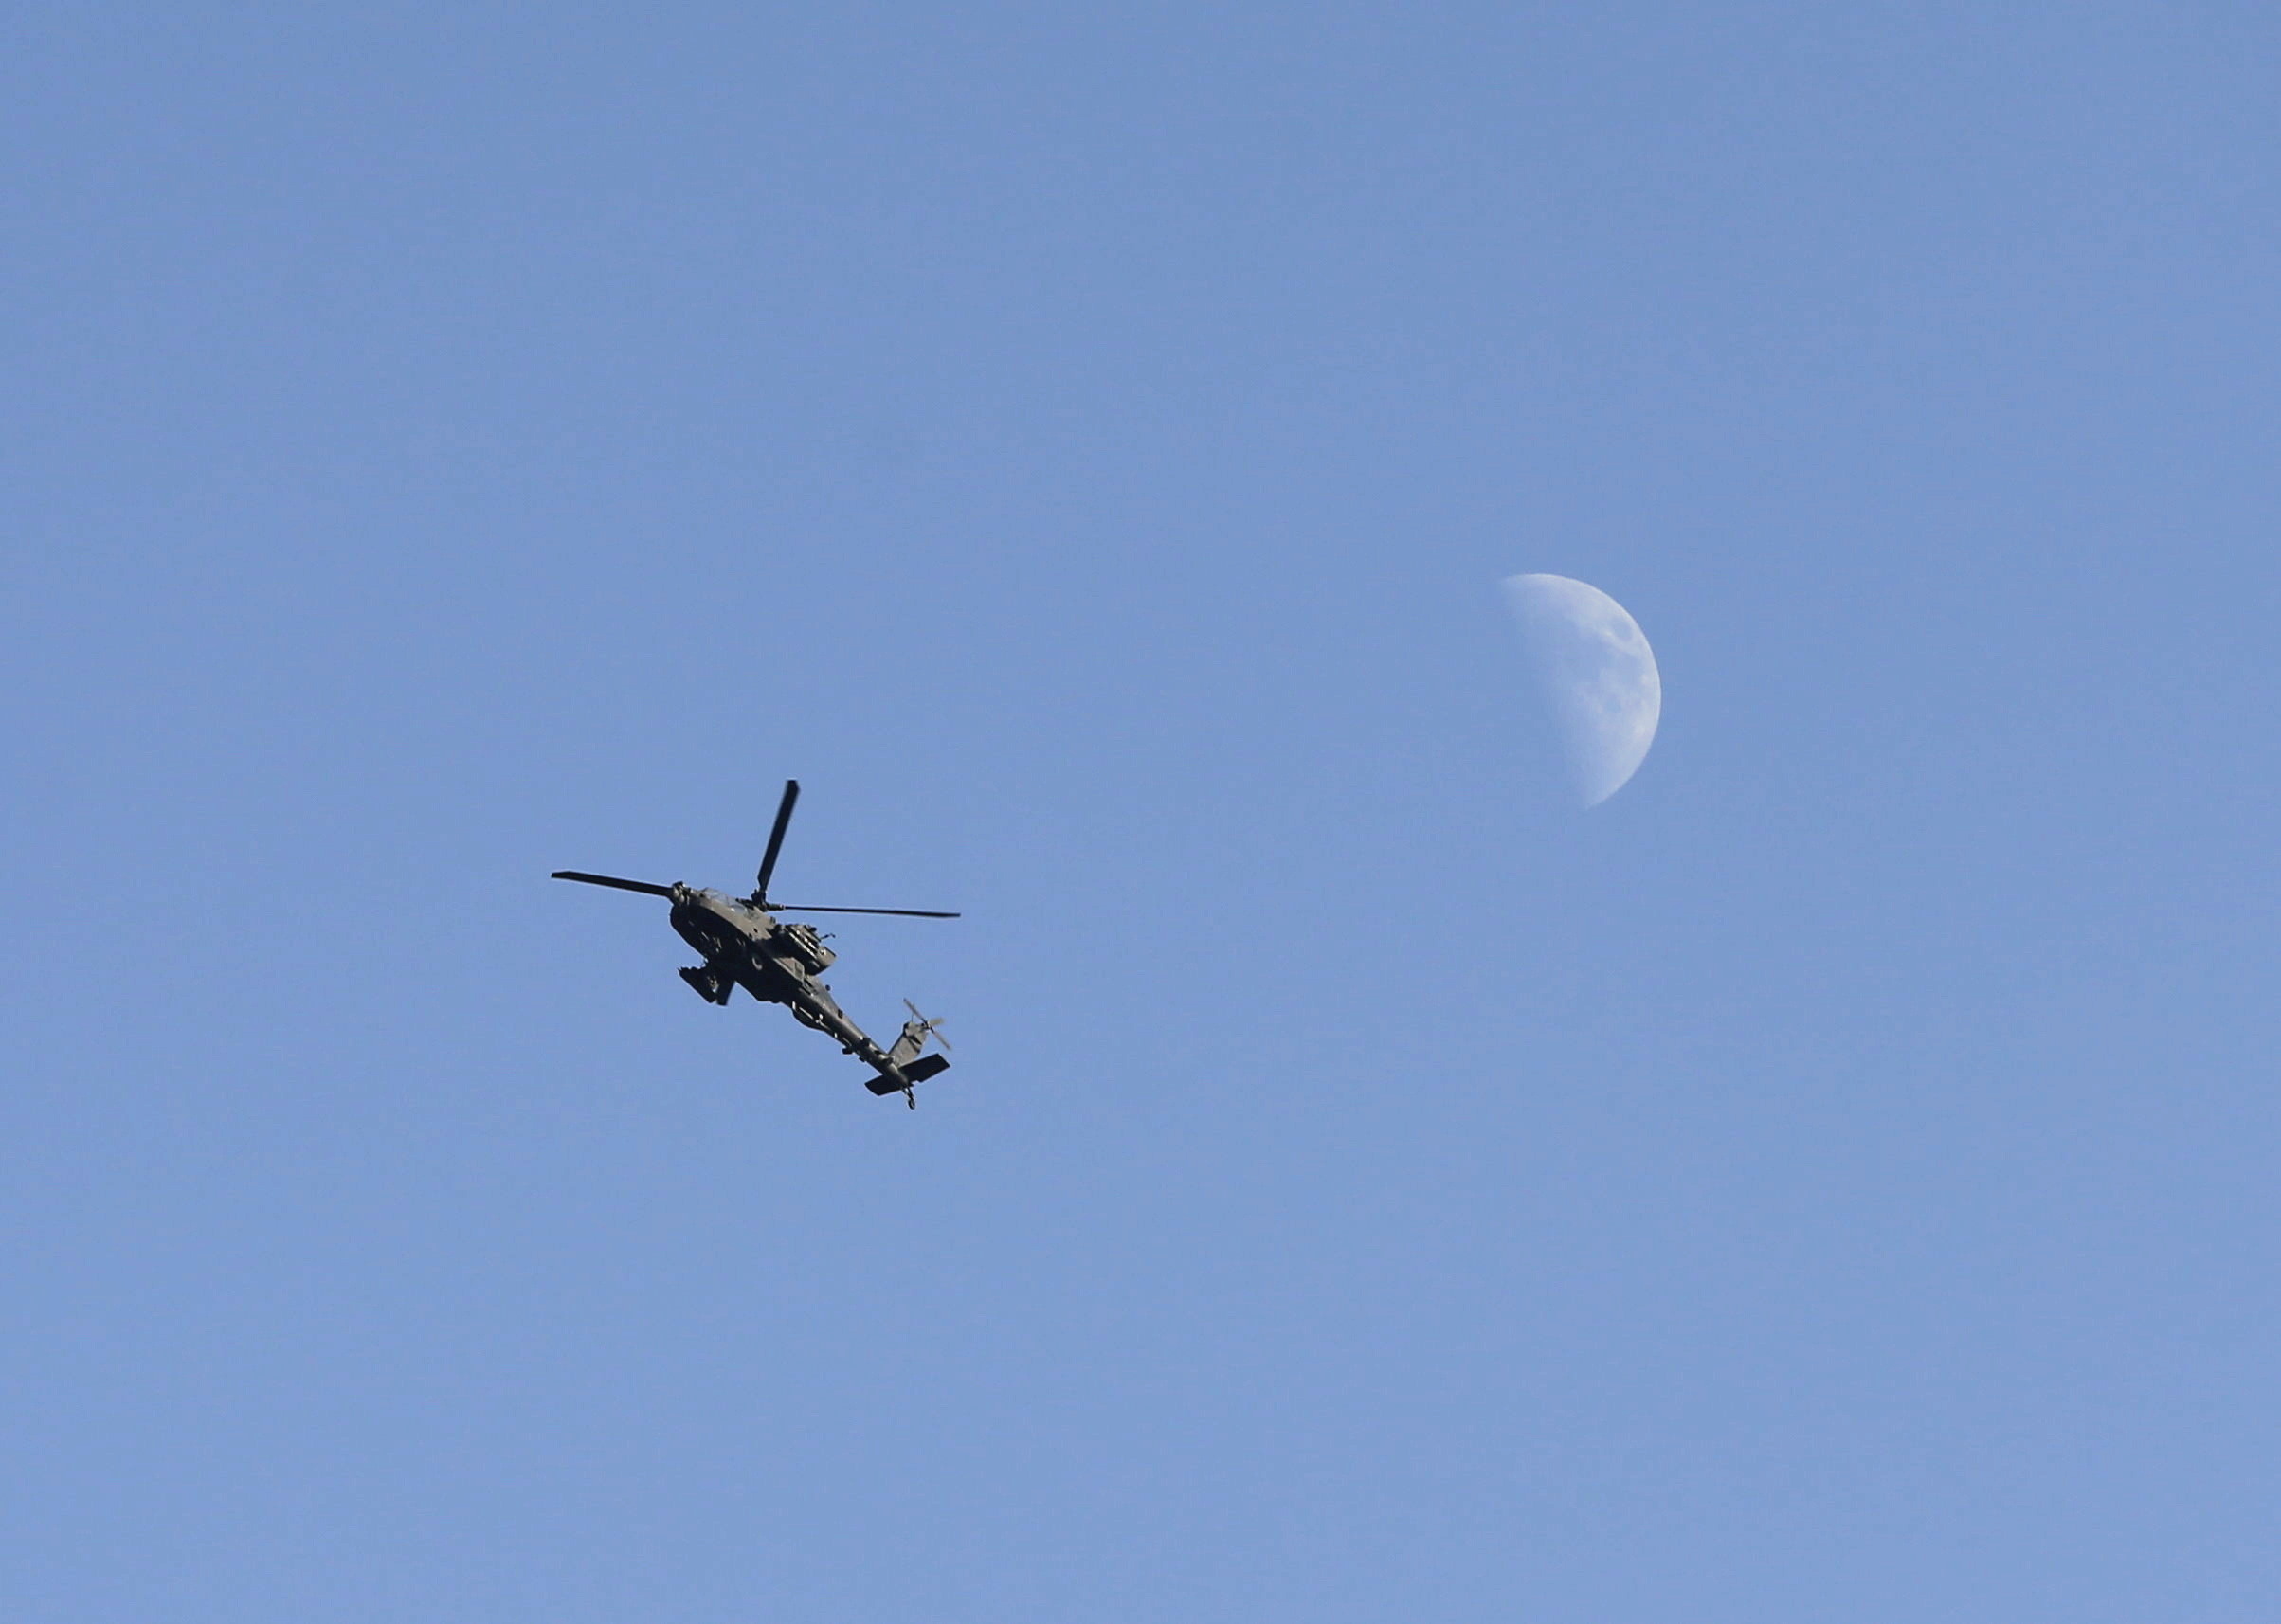 U.S. Army Apache helicopter flies over Kabul, Afghanistan August 15, 2021. REUTERS/Stringer